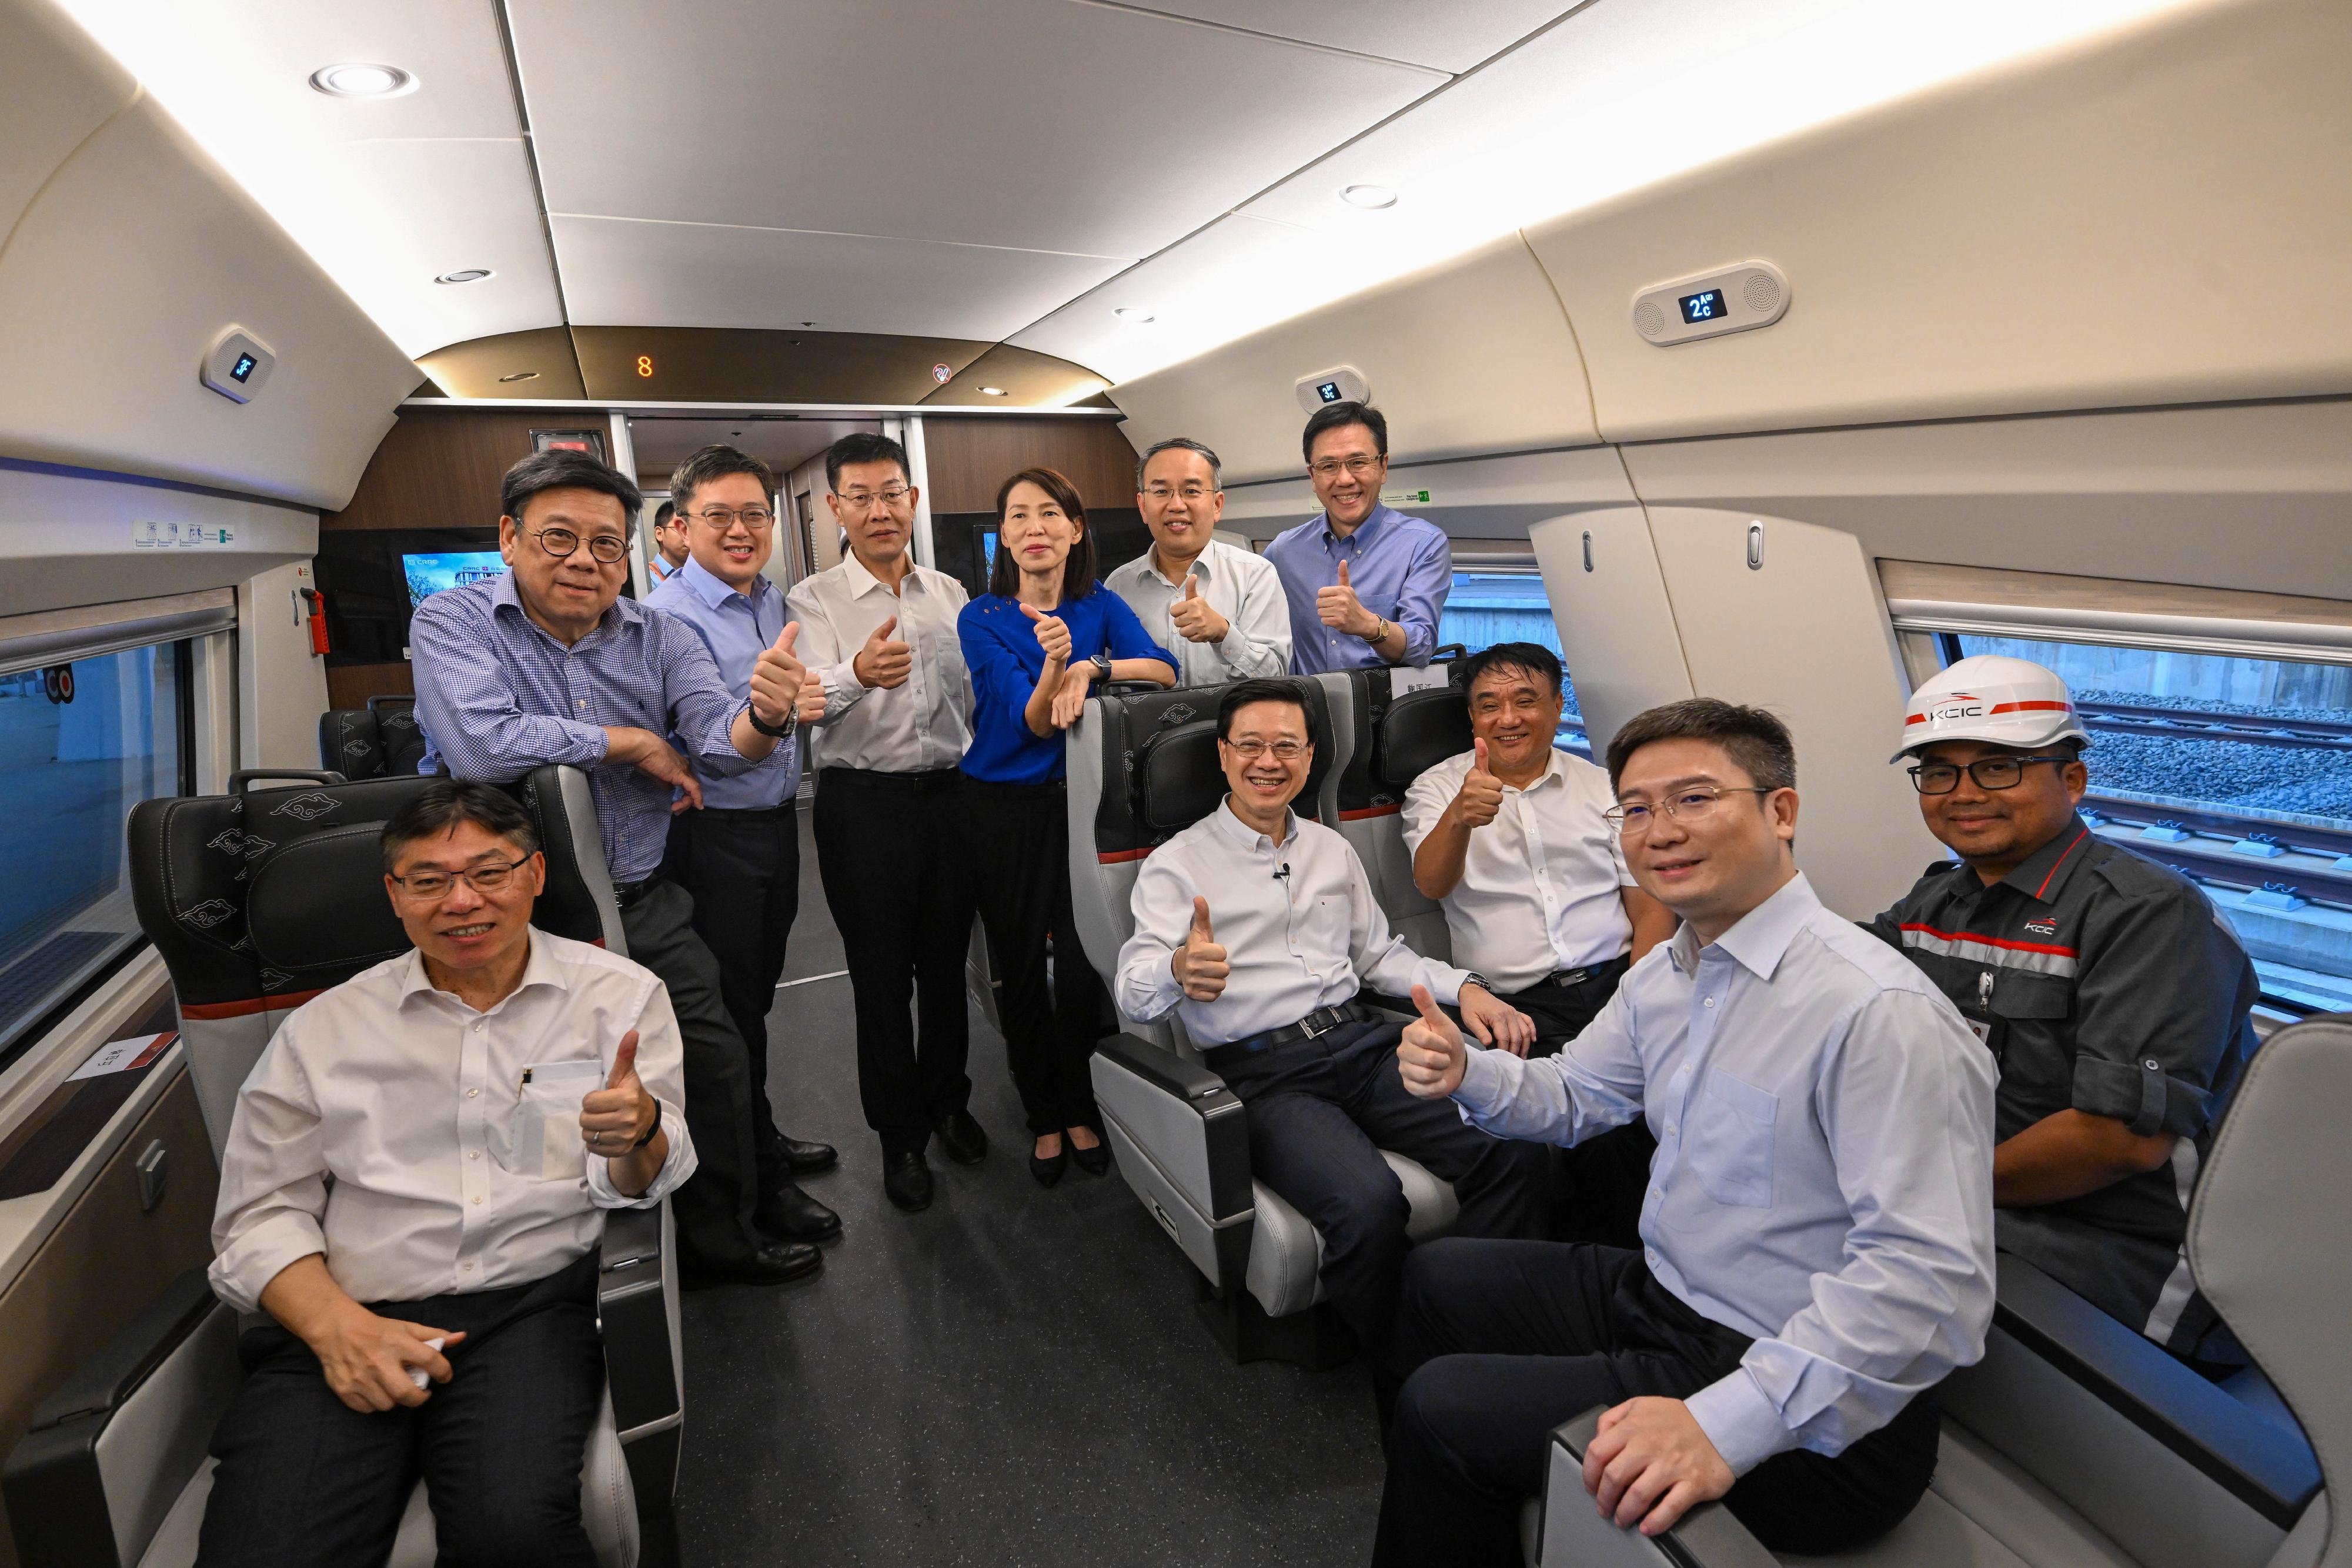 The Chief Executive, Mr John Lee, and the Hong Kong Special Administrative Region delegation visited the Jakarta-Bandung High Speed Railway in Jakarta, Indonesia today (July 26). Photo shows Mr Lee (front row, fourth right); the Secretary for Financial Services and the Treasury, Mr Christopher Hui (back row, second right); the Secretary for Commerce and Economic Development, Mr Algernon Yau (back row, first left); the Secretary for Transport and Logistics, Mr Lam Sai-hung (front row, first left); the Secretary for Innovation, Technology and Industry, Professor Sun Dong (back row, first right); the Director of the Chief Executive's Office, Ms Carol Yip (back row, third right); the Chairman of the Chinese Railway International Group, Mr Ju Guojiang (front row, third right); and other representatives of the railway company.